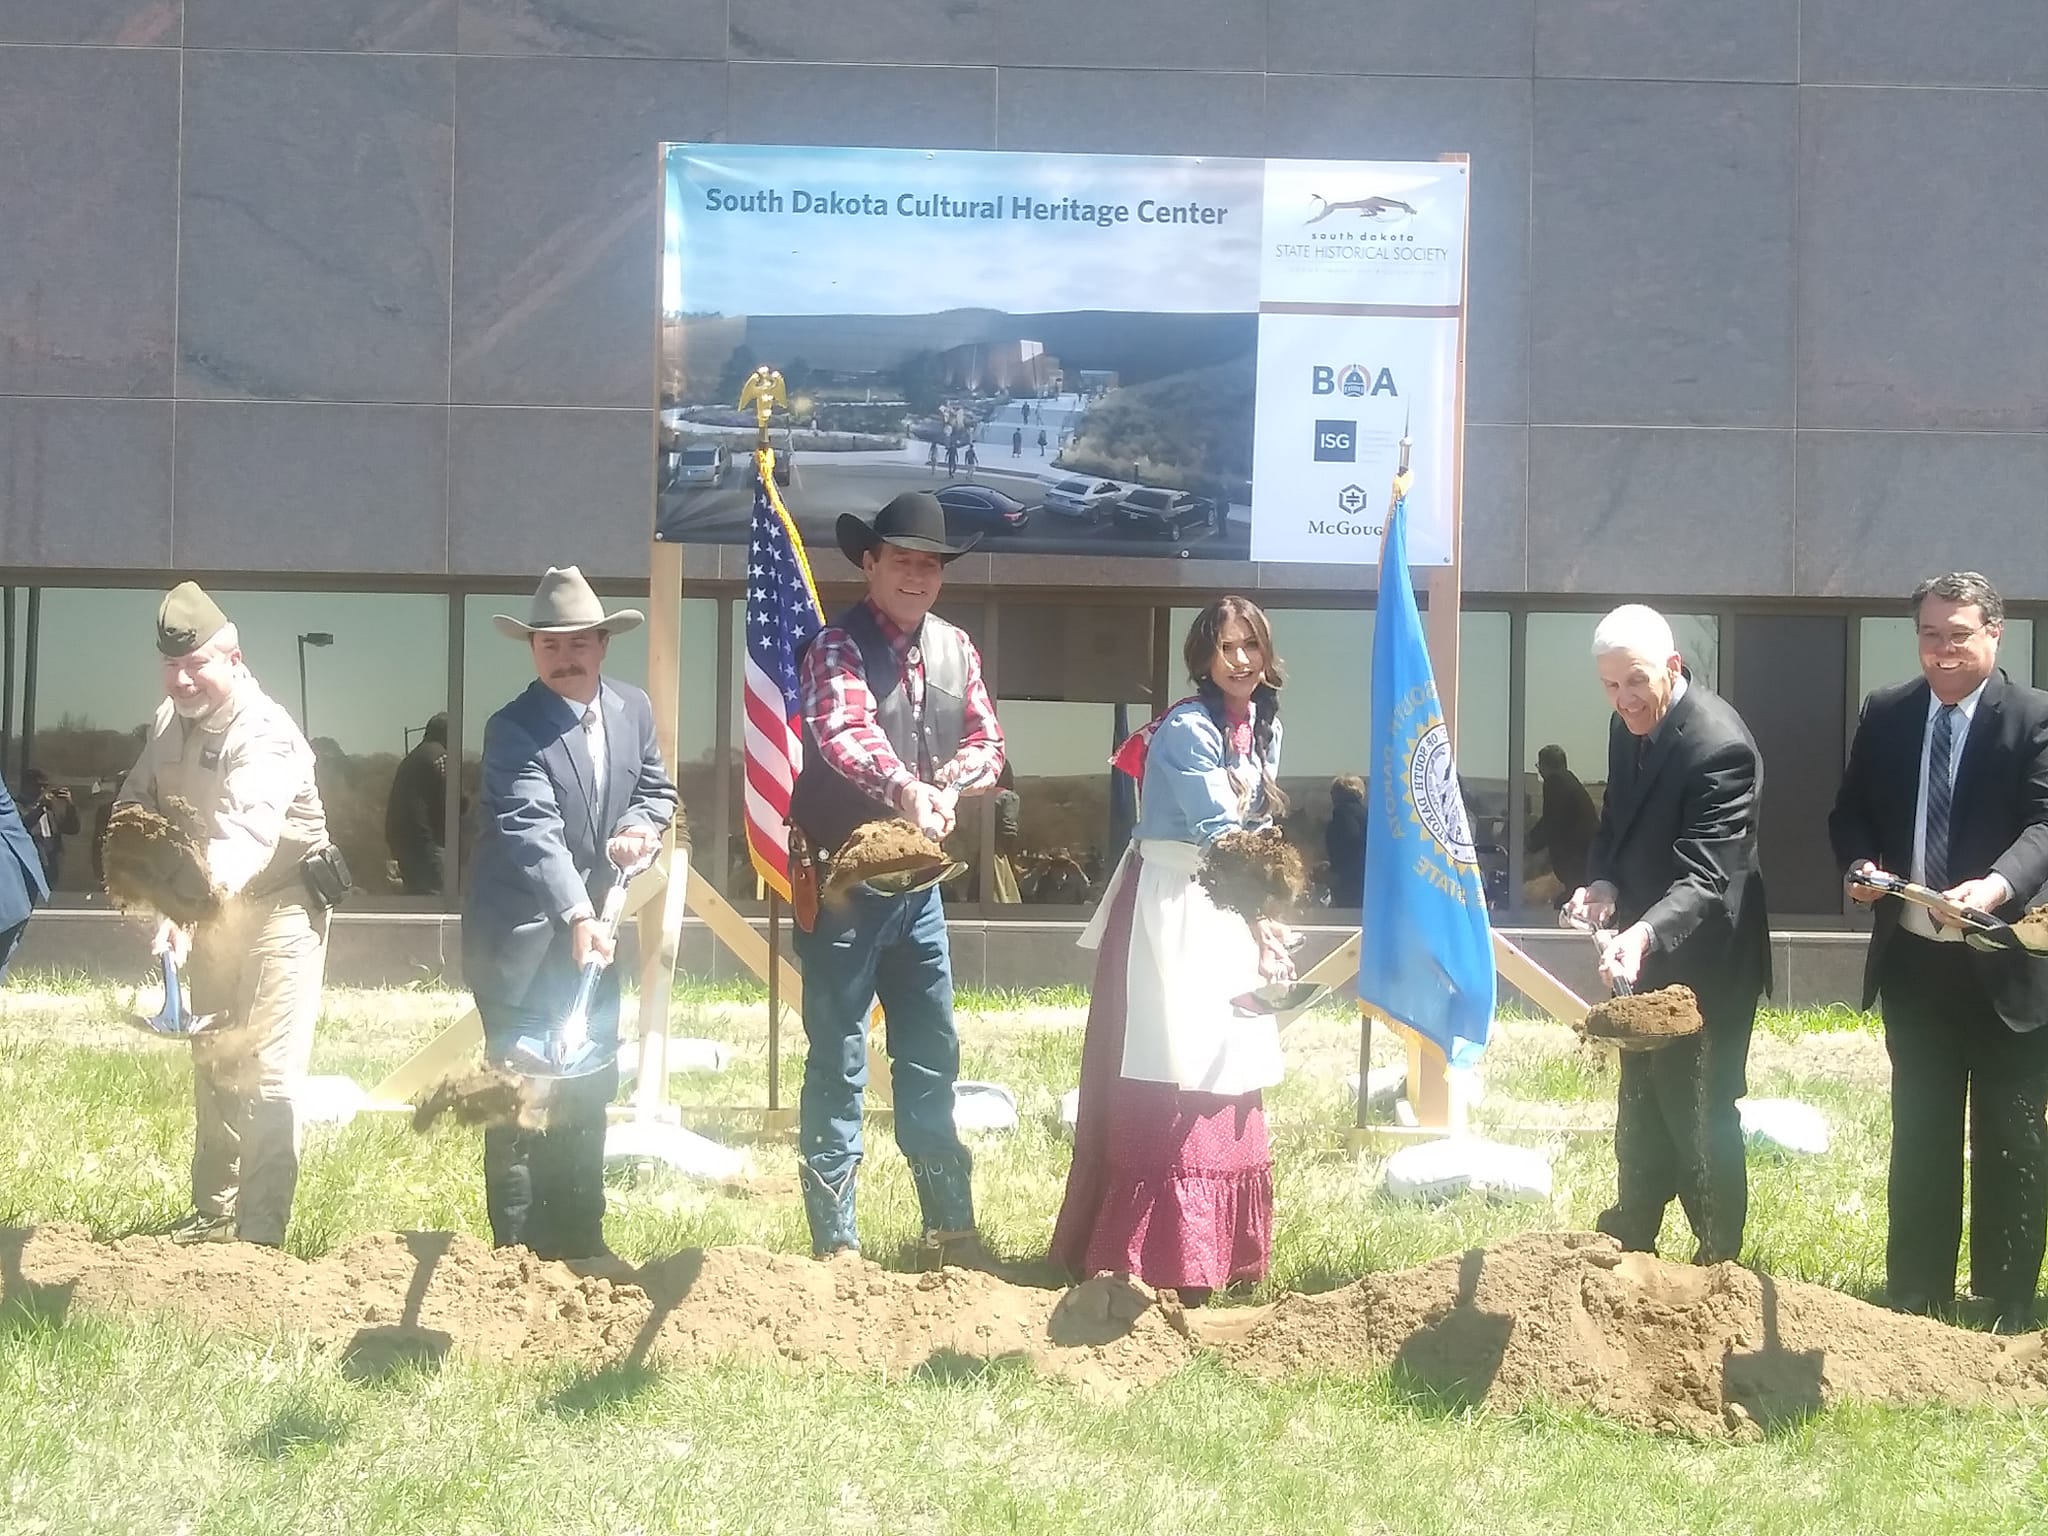 Groundbreaking Held For Cultural Heritage Center Renovation Tuesday